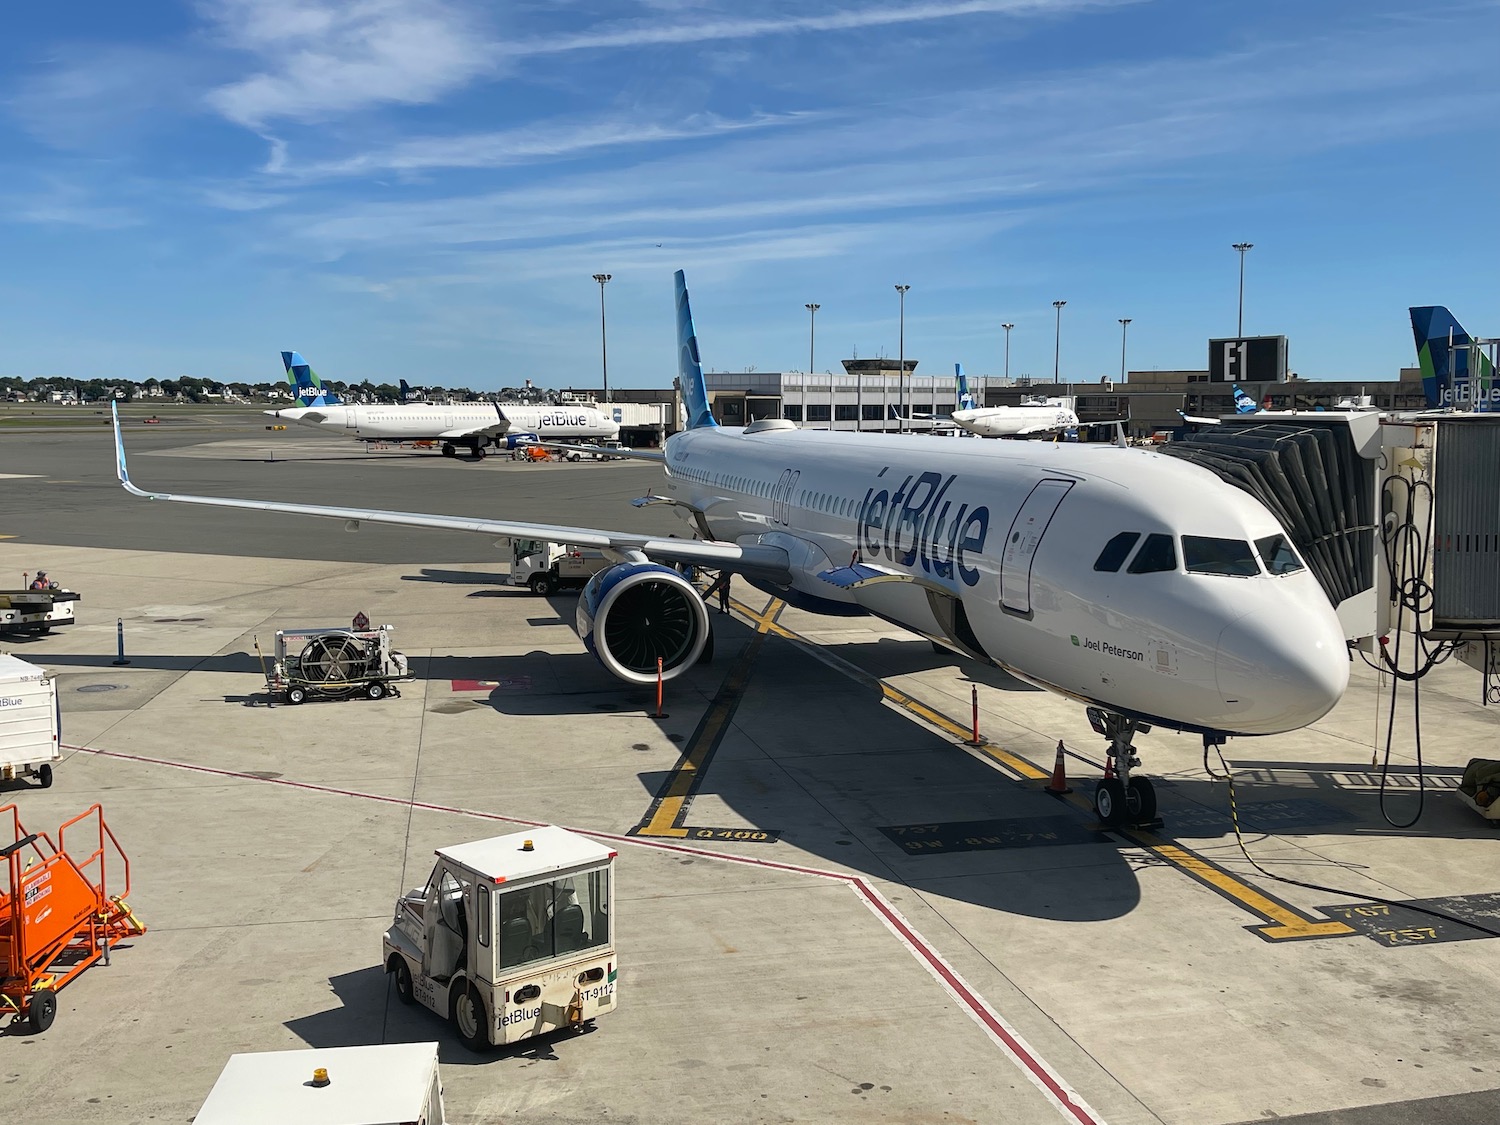 a jet blue airplane at an airport